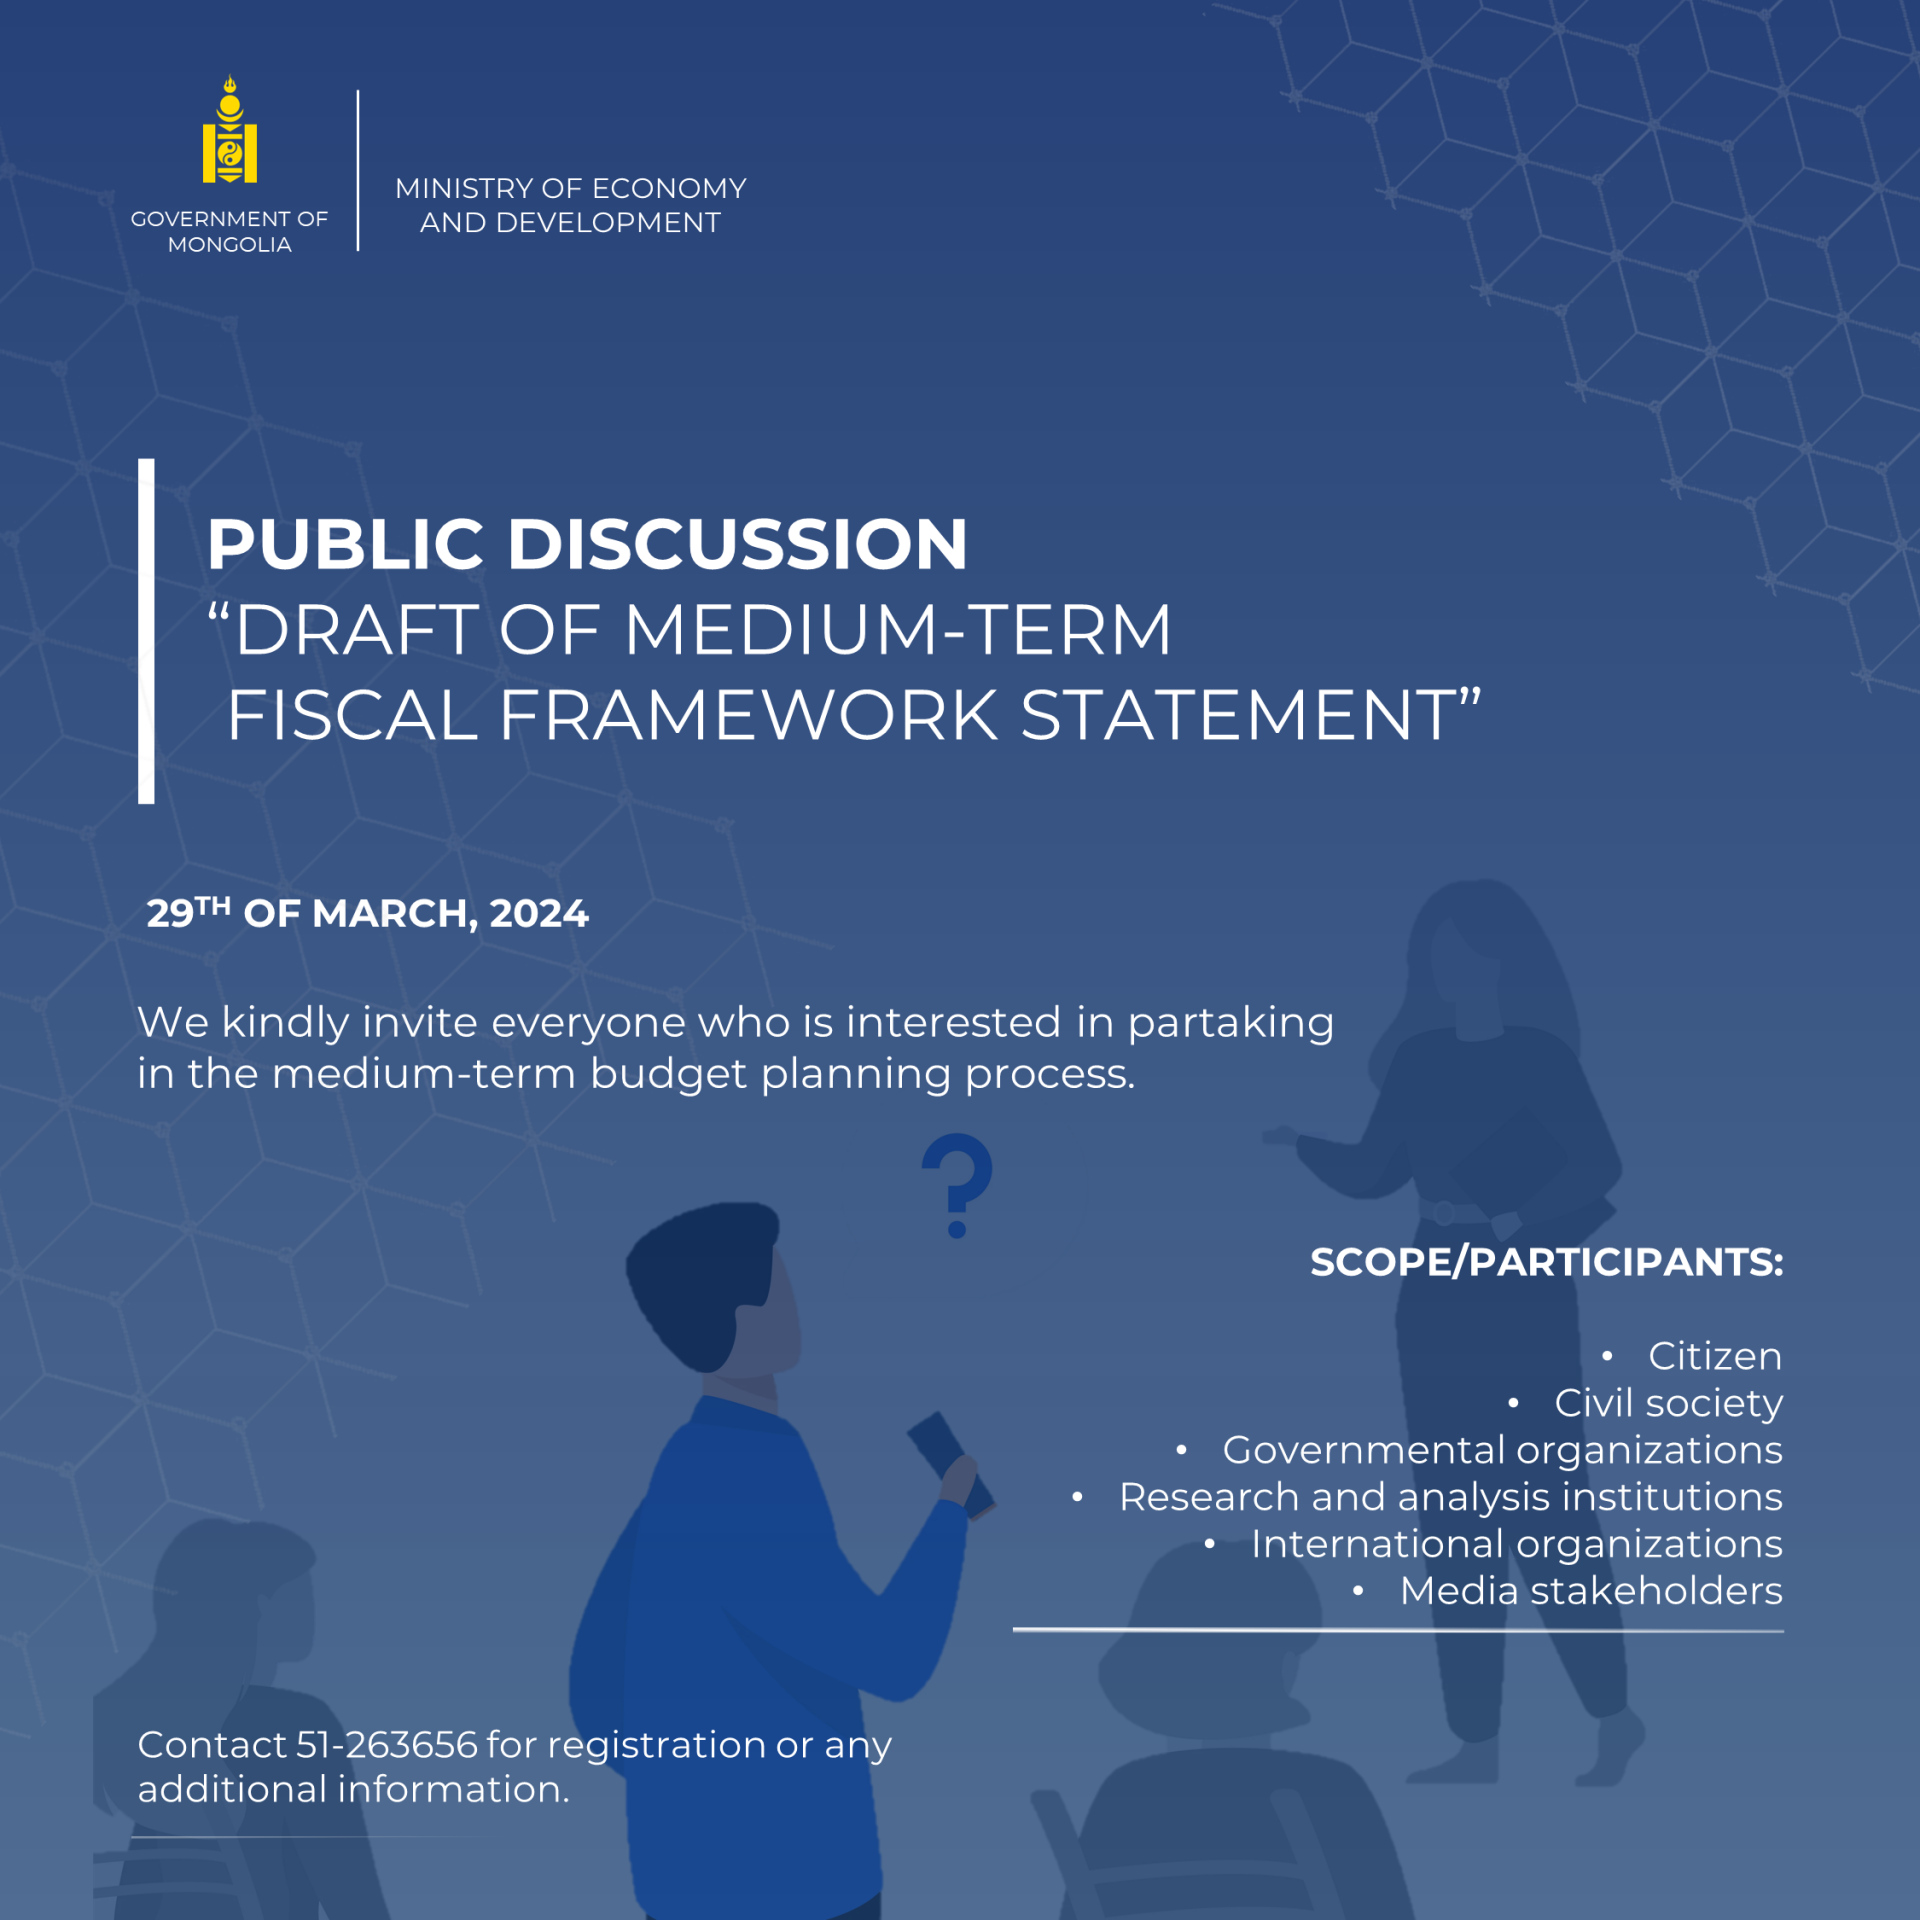 Public discussion event for the Draft of Medium-Term Fiscal Framework